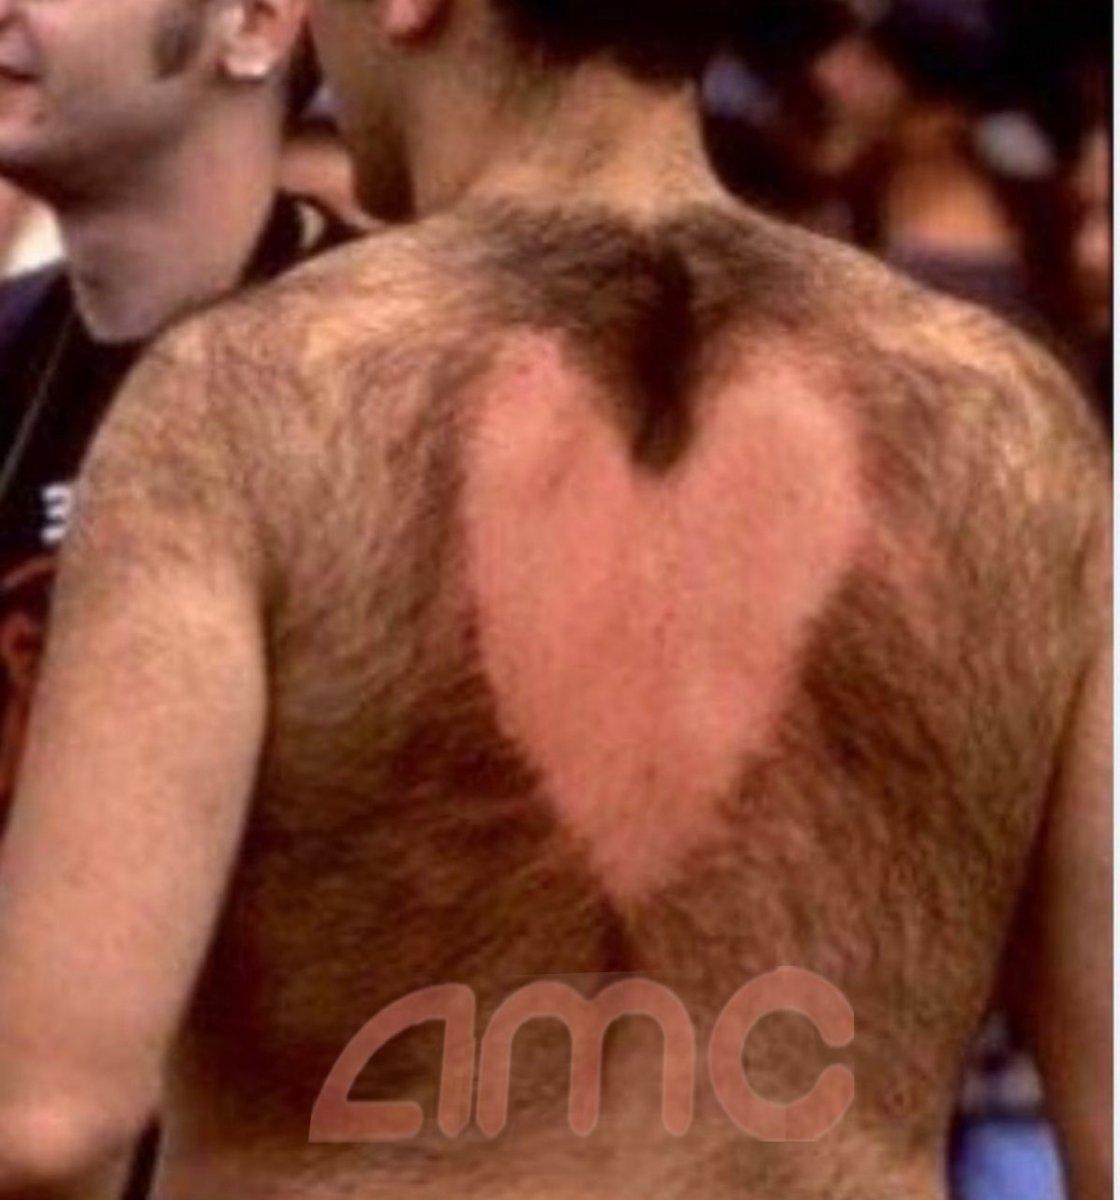 I forgot to wish everyone a #HappyValentineDay.  May your wildest dreams come true today.
#AMCNOTLEAVING ❤️ 
$AMC $APE 🍿